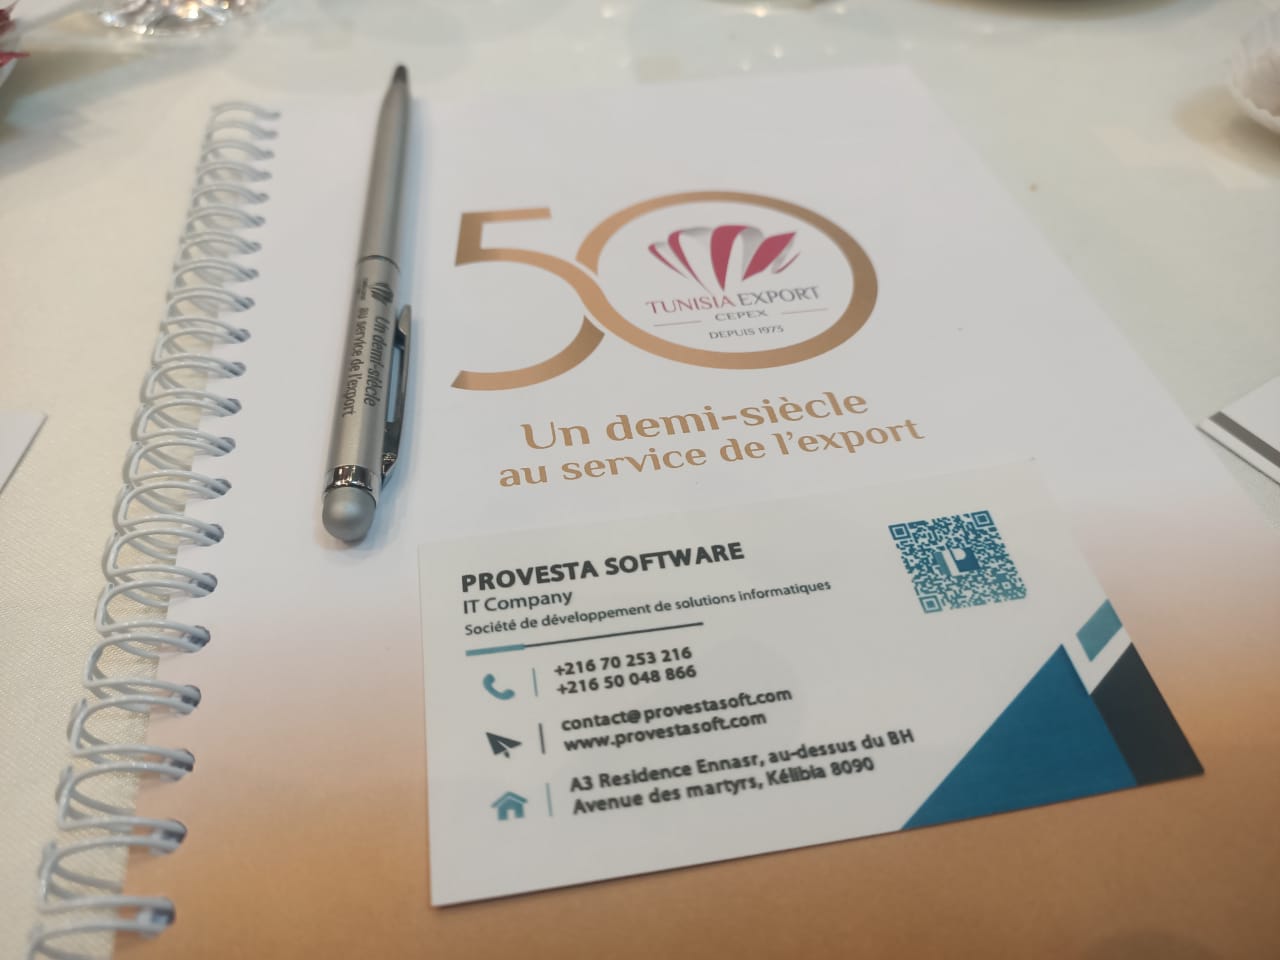 Provesta Soft participates in the 3rd Export Morning: Towards a New Dynamic of Export Development.